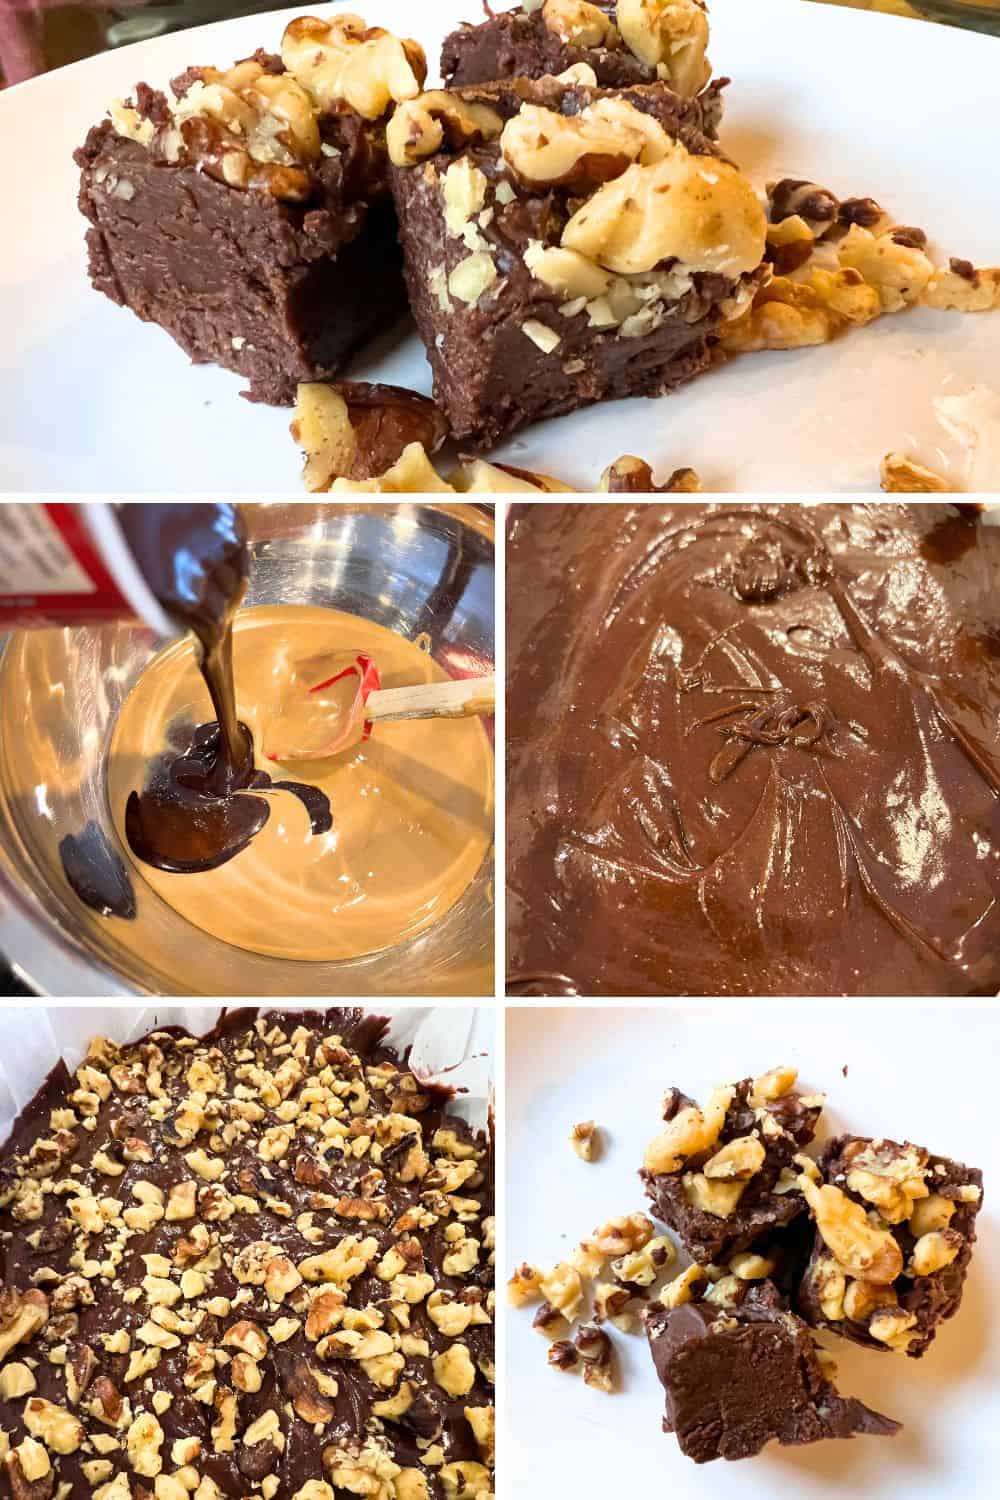 How To Make Fudge Step By Step Instructions (2 Ingredient Fudge Recipe) - different images of fudge recipe being made